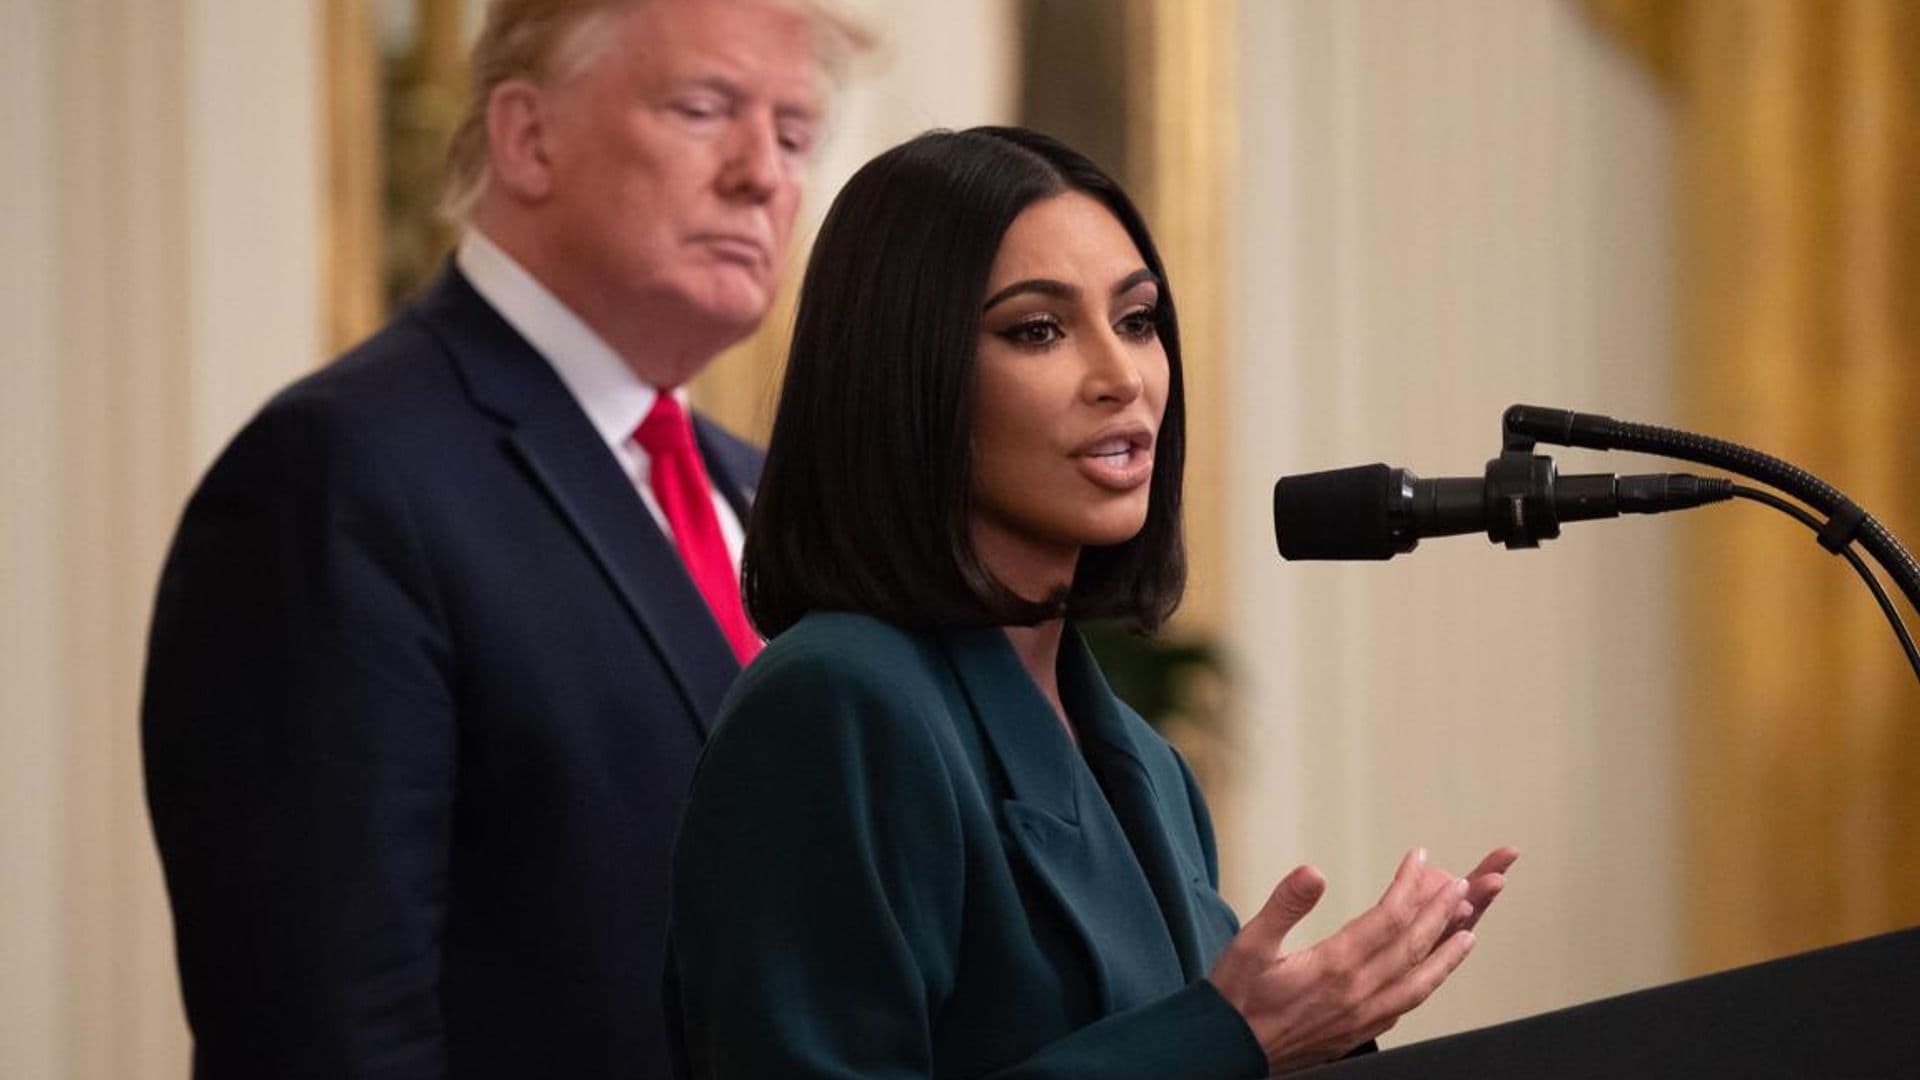 Kim Kardashian opens up about her experience with Donald Trump